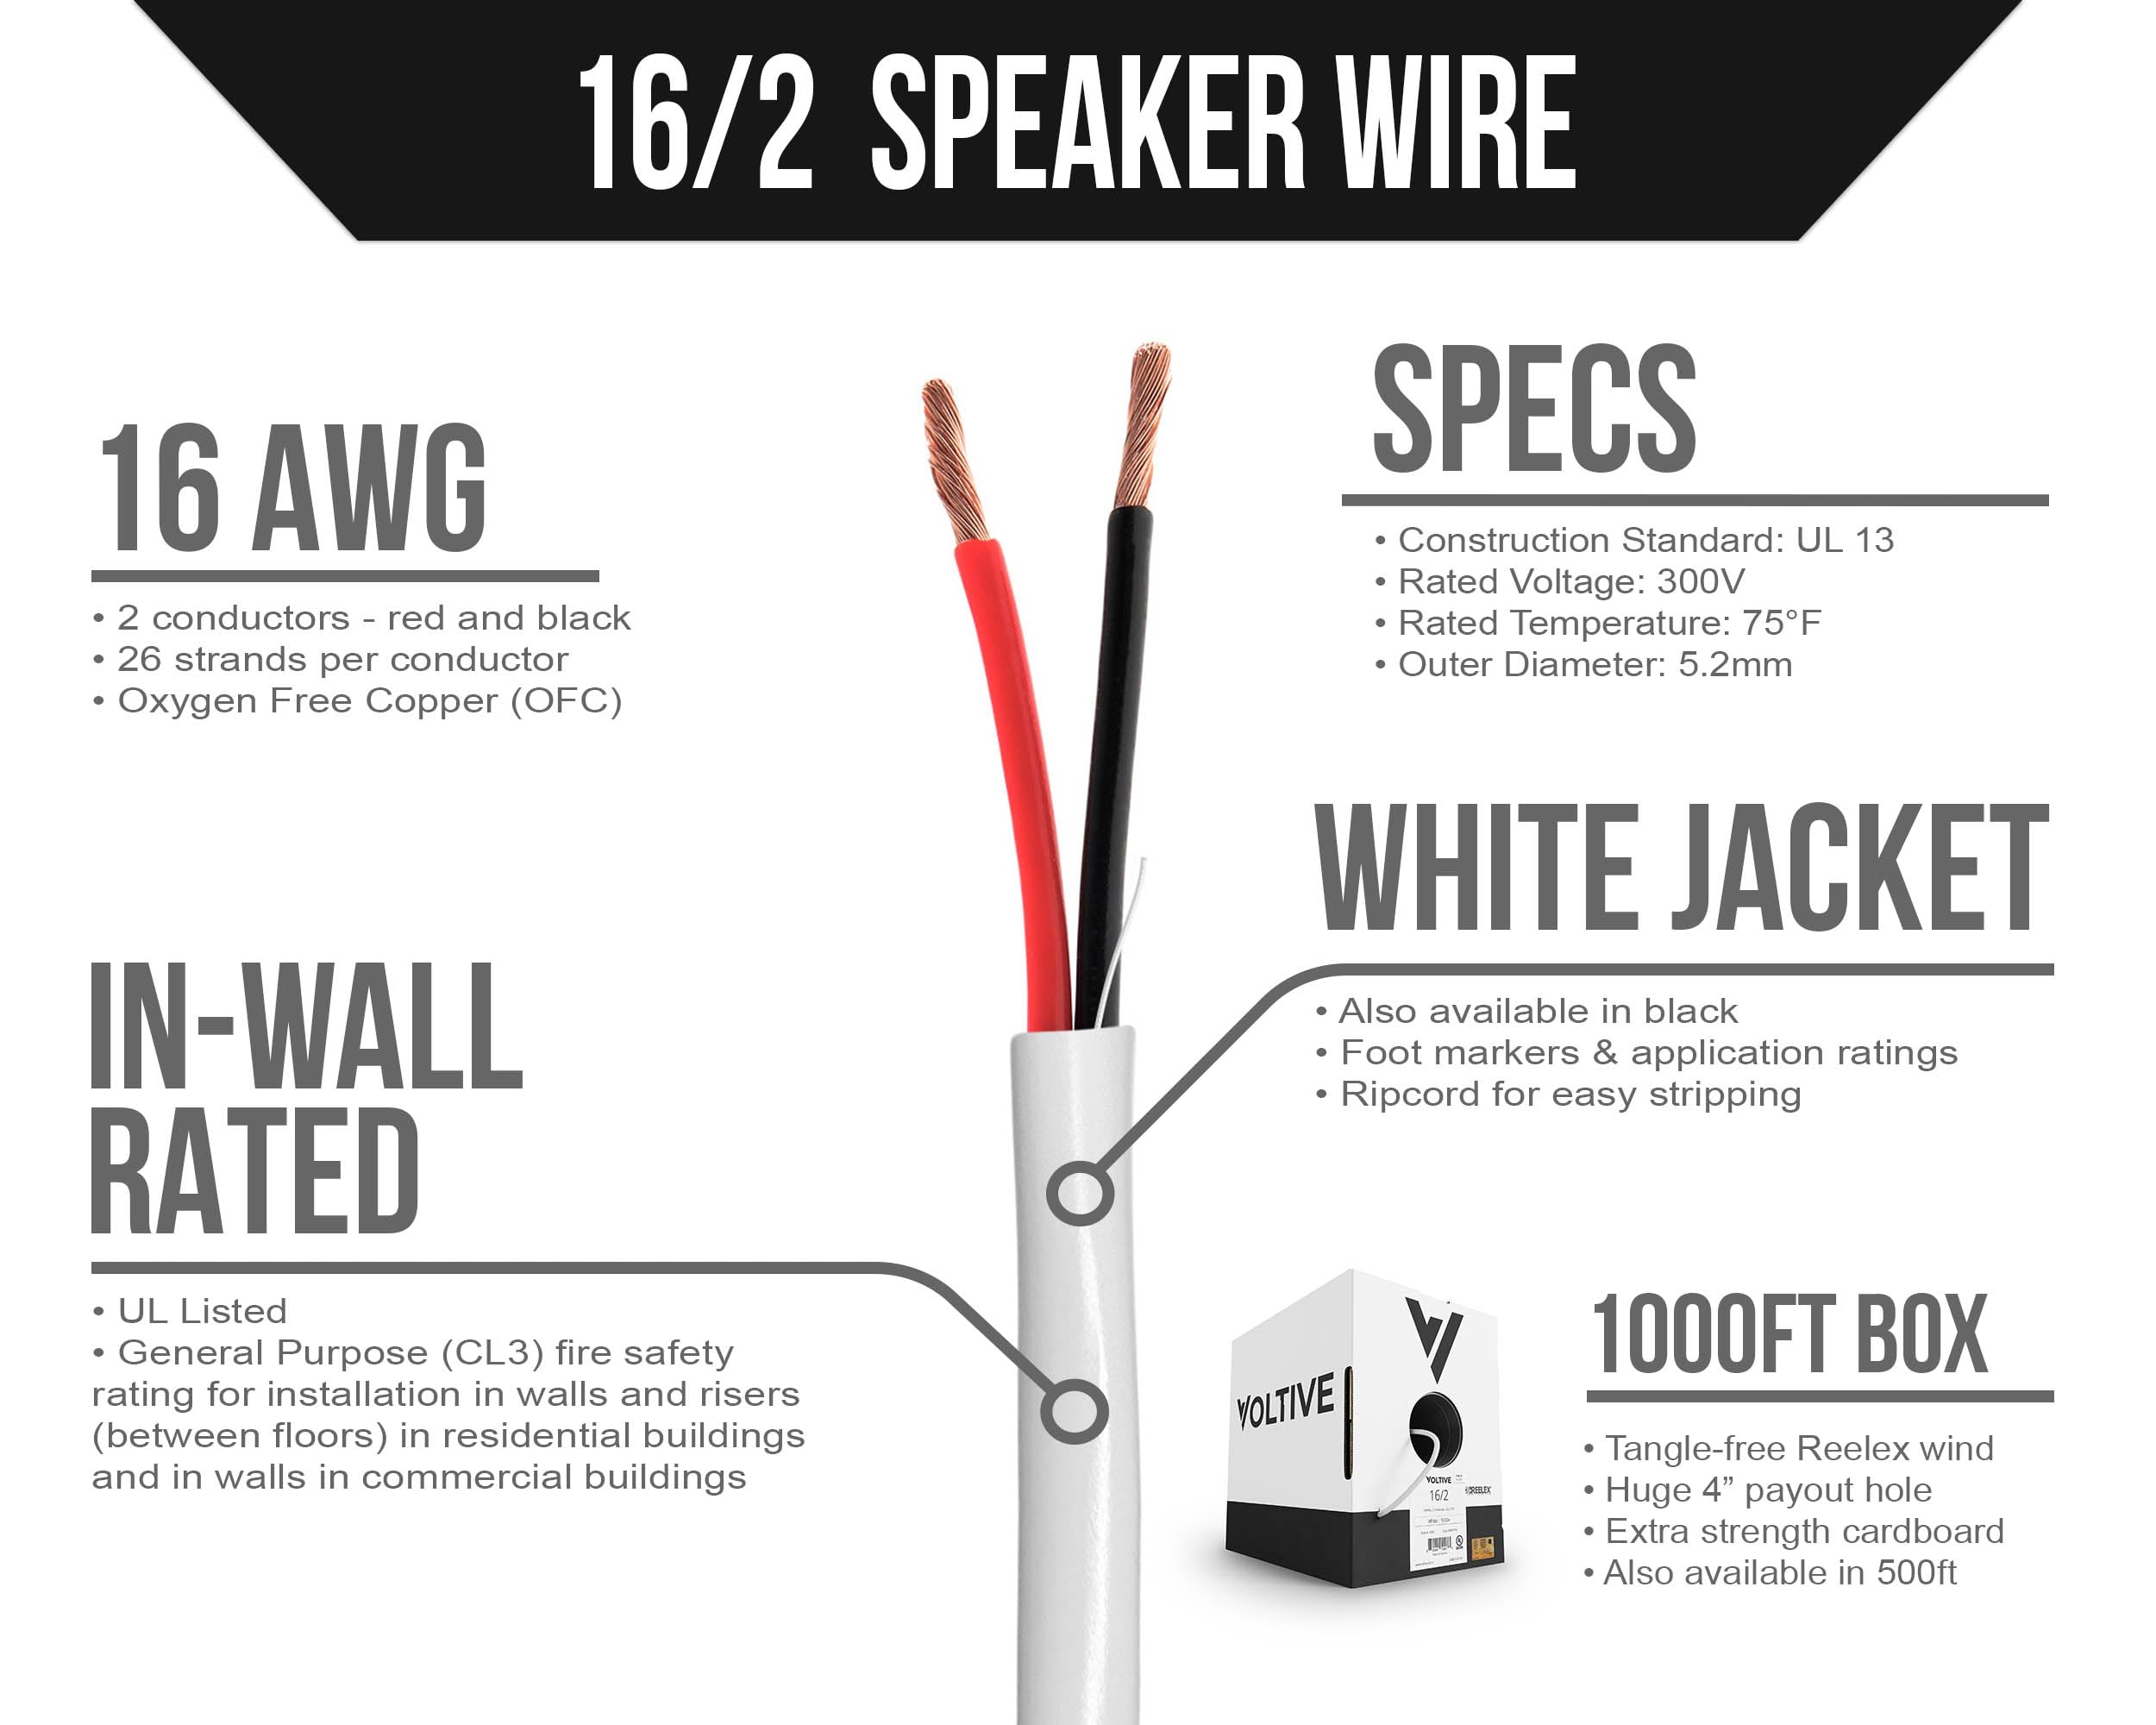 Voltive 16/2 Speaker Wire - 16 AWG/Gauge 2 Conductor - UL Listed in Wall Rated (CL2/CL3) - Oxygen-Free Copper (OFC) - 1000 Foot Bulk Cable Pull Box - White